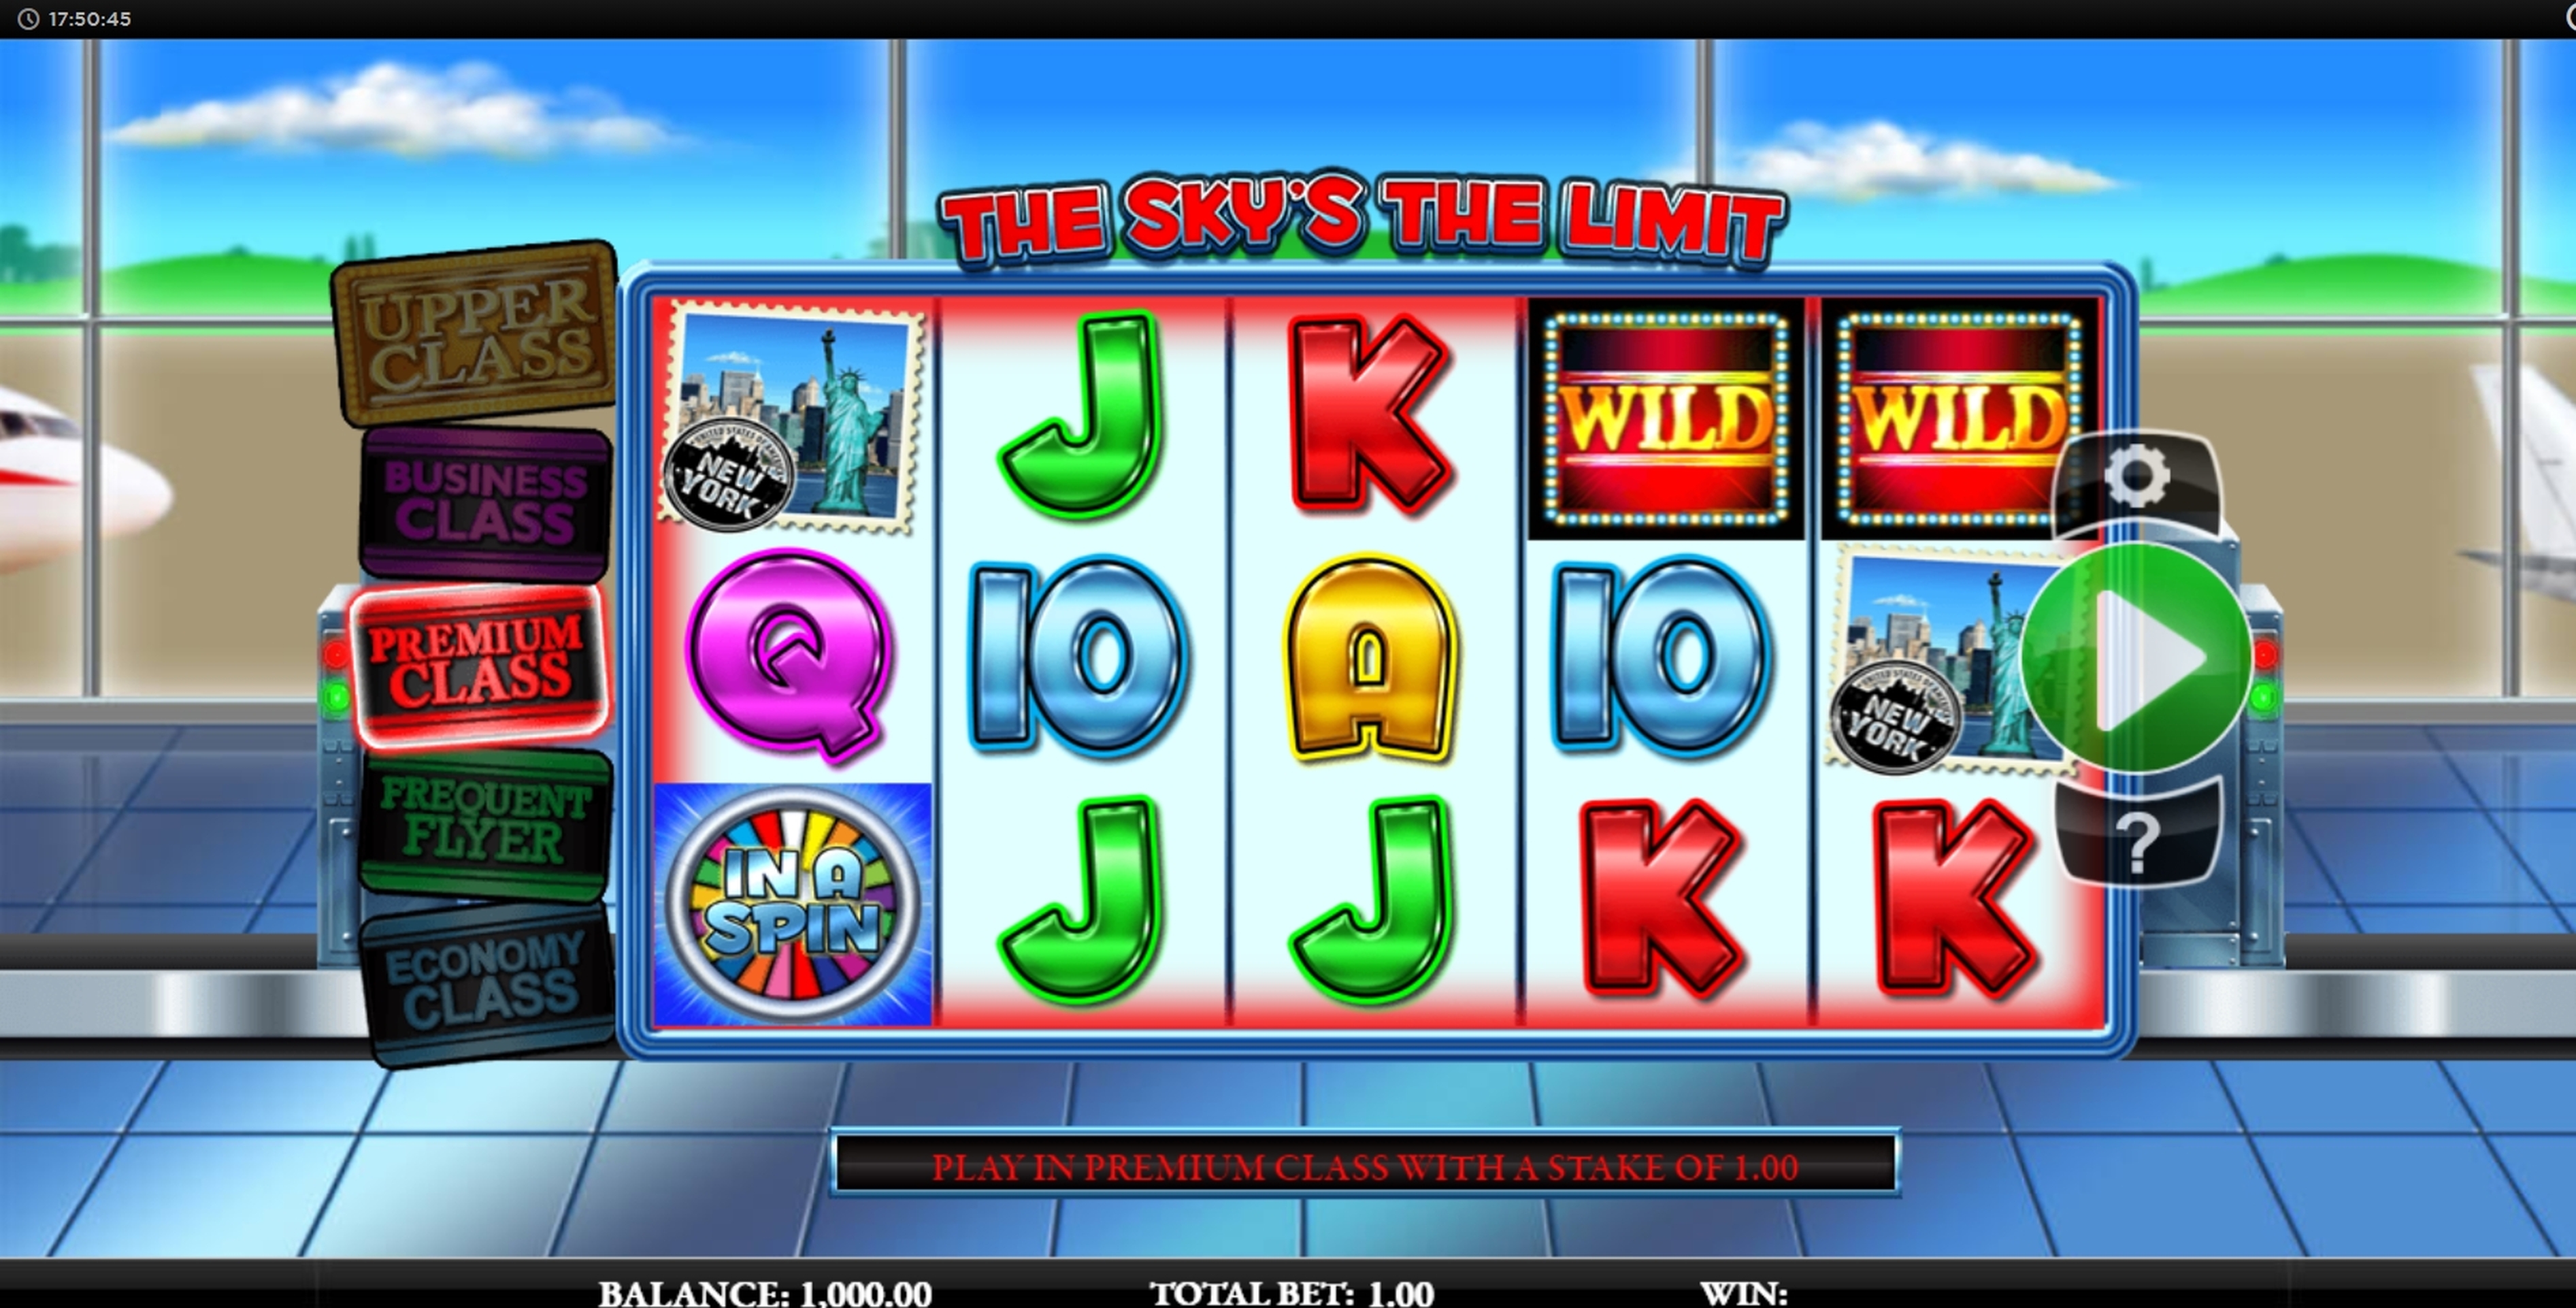 Reels in The Sky's the Limit Slot Game by Live 5 Gaming